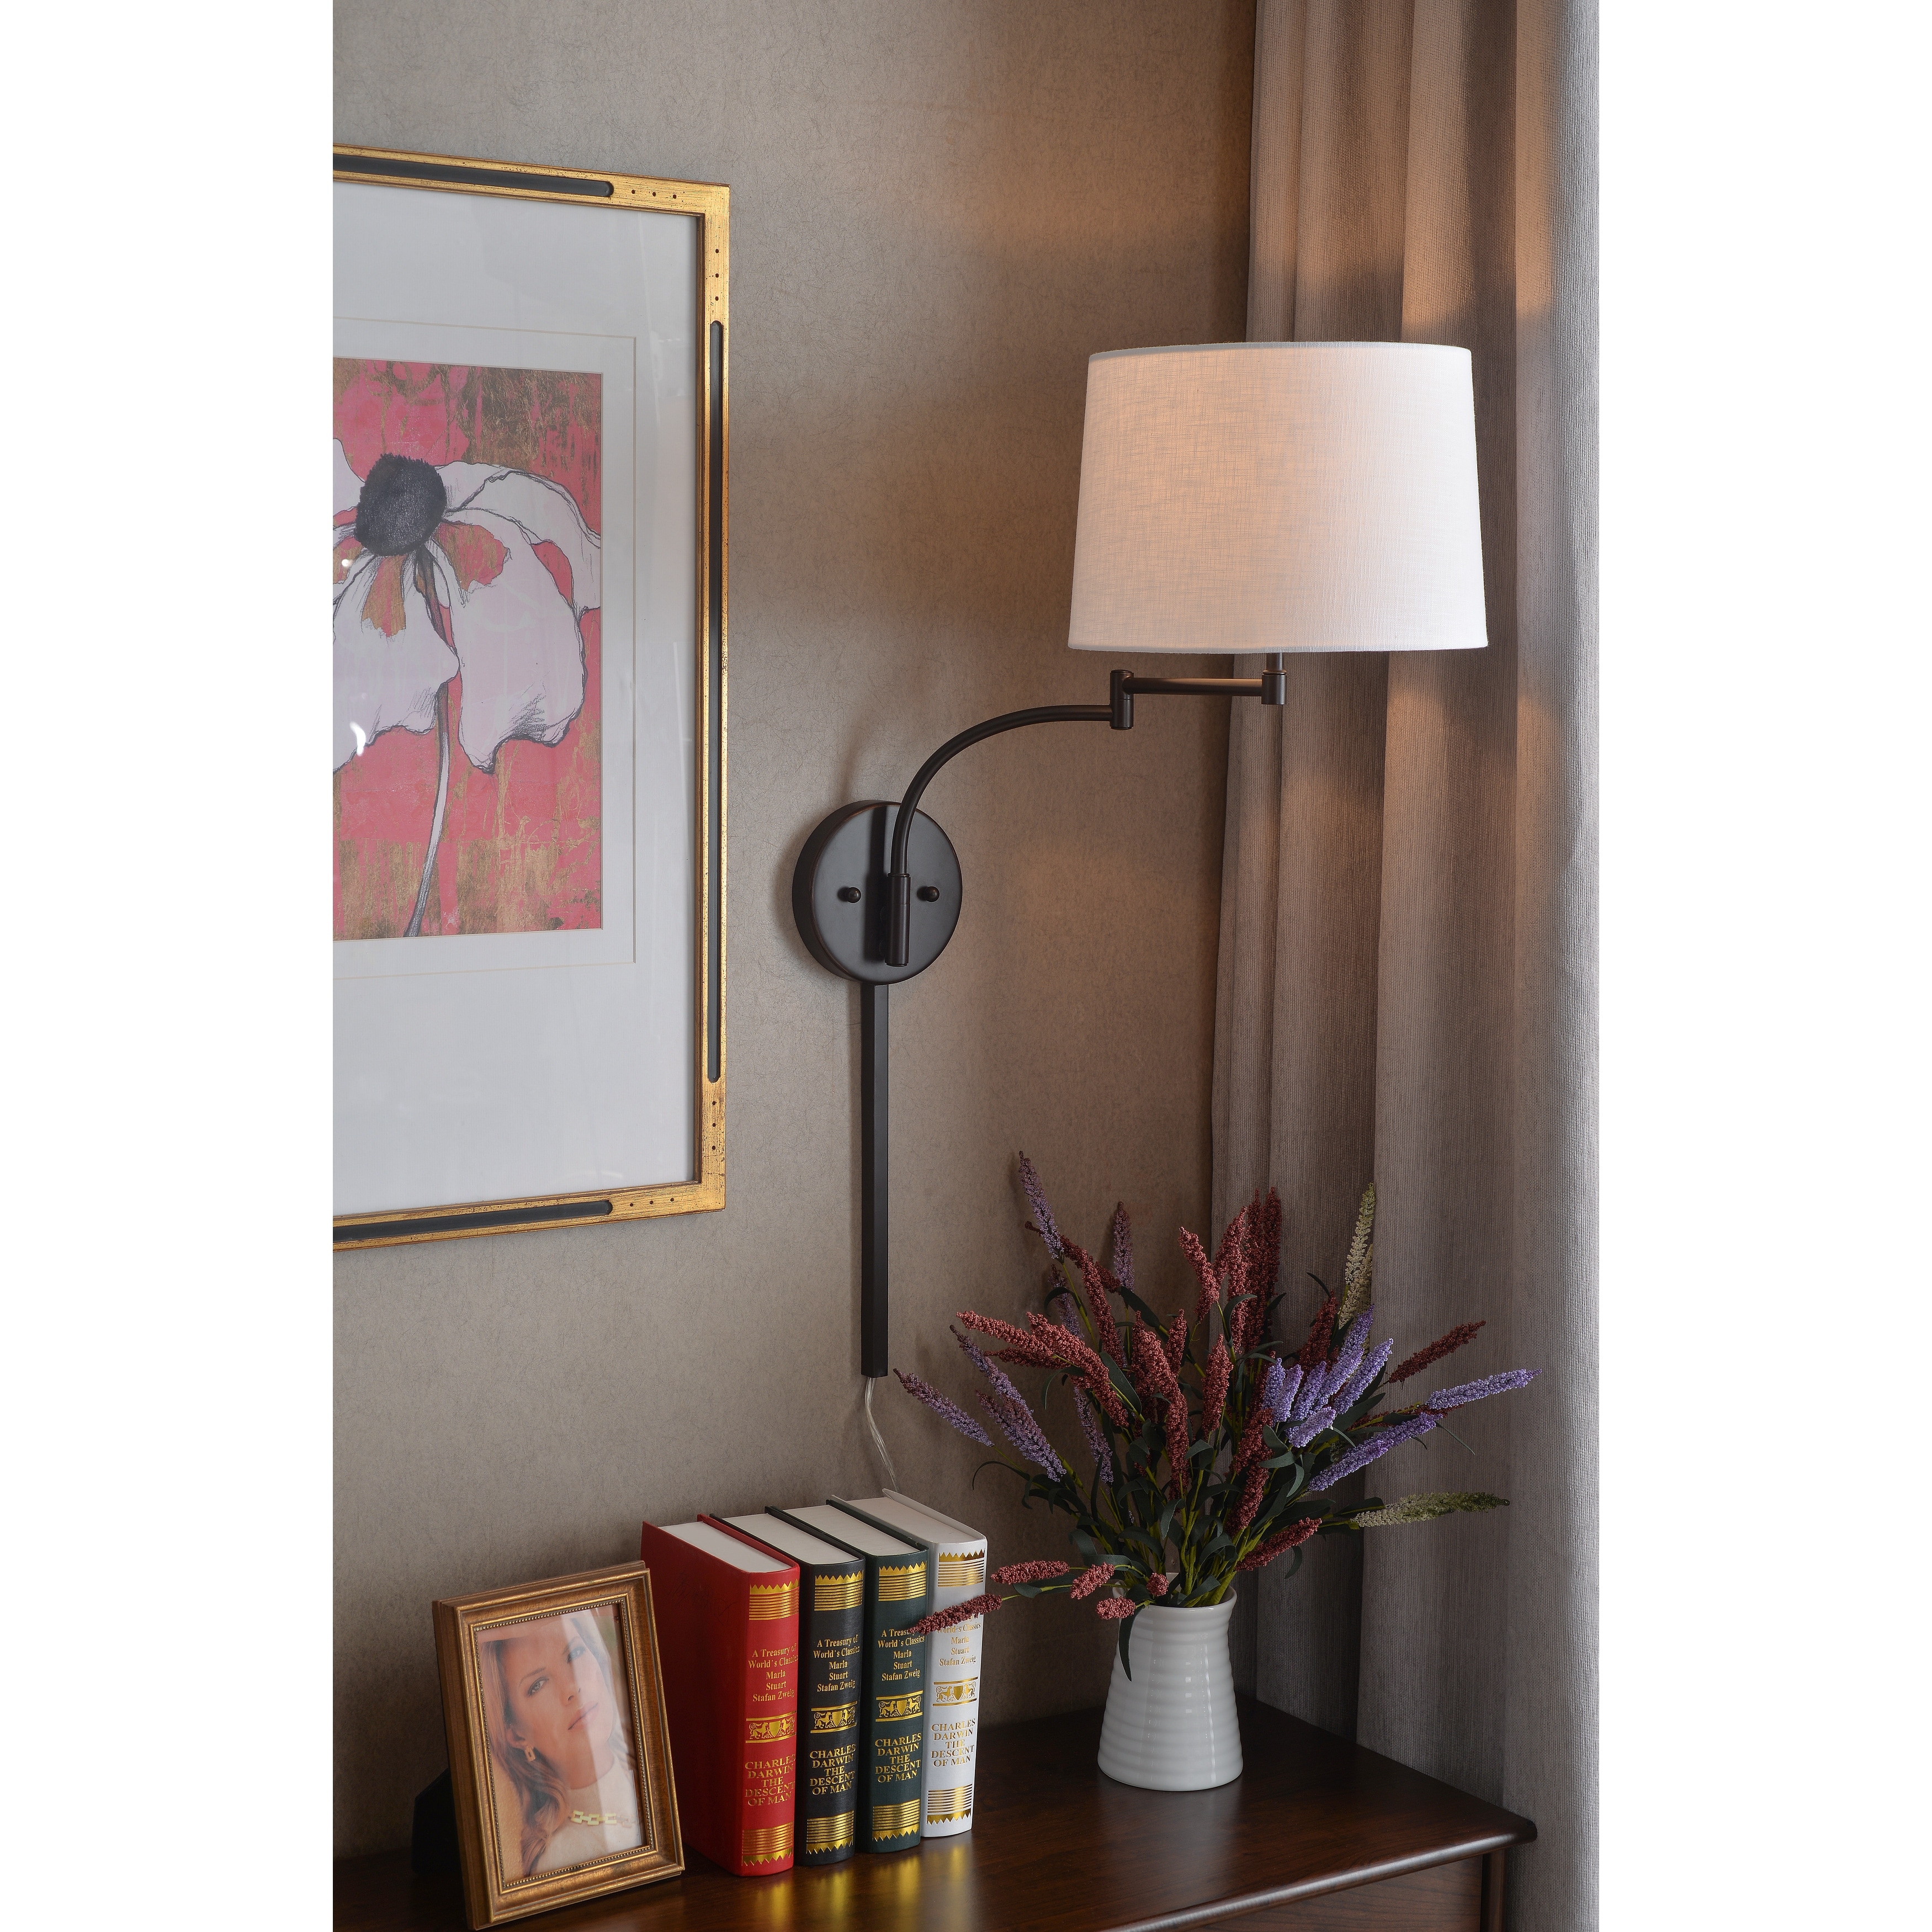 Siete Wall Swing Arm Lamp - Oil Rubbed Bronze - Overstock - 21422711